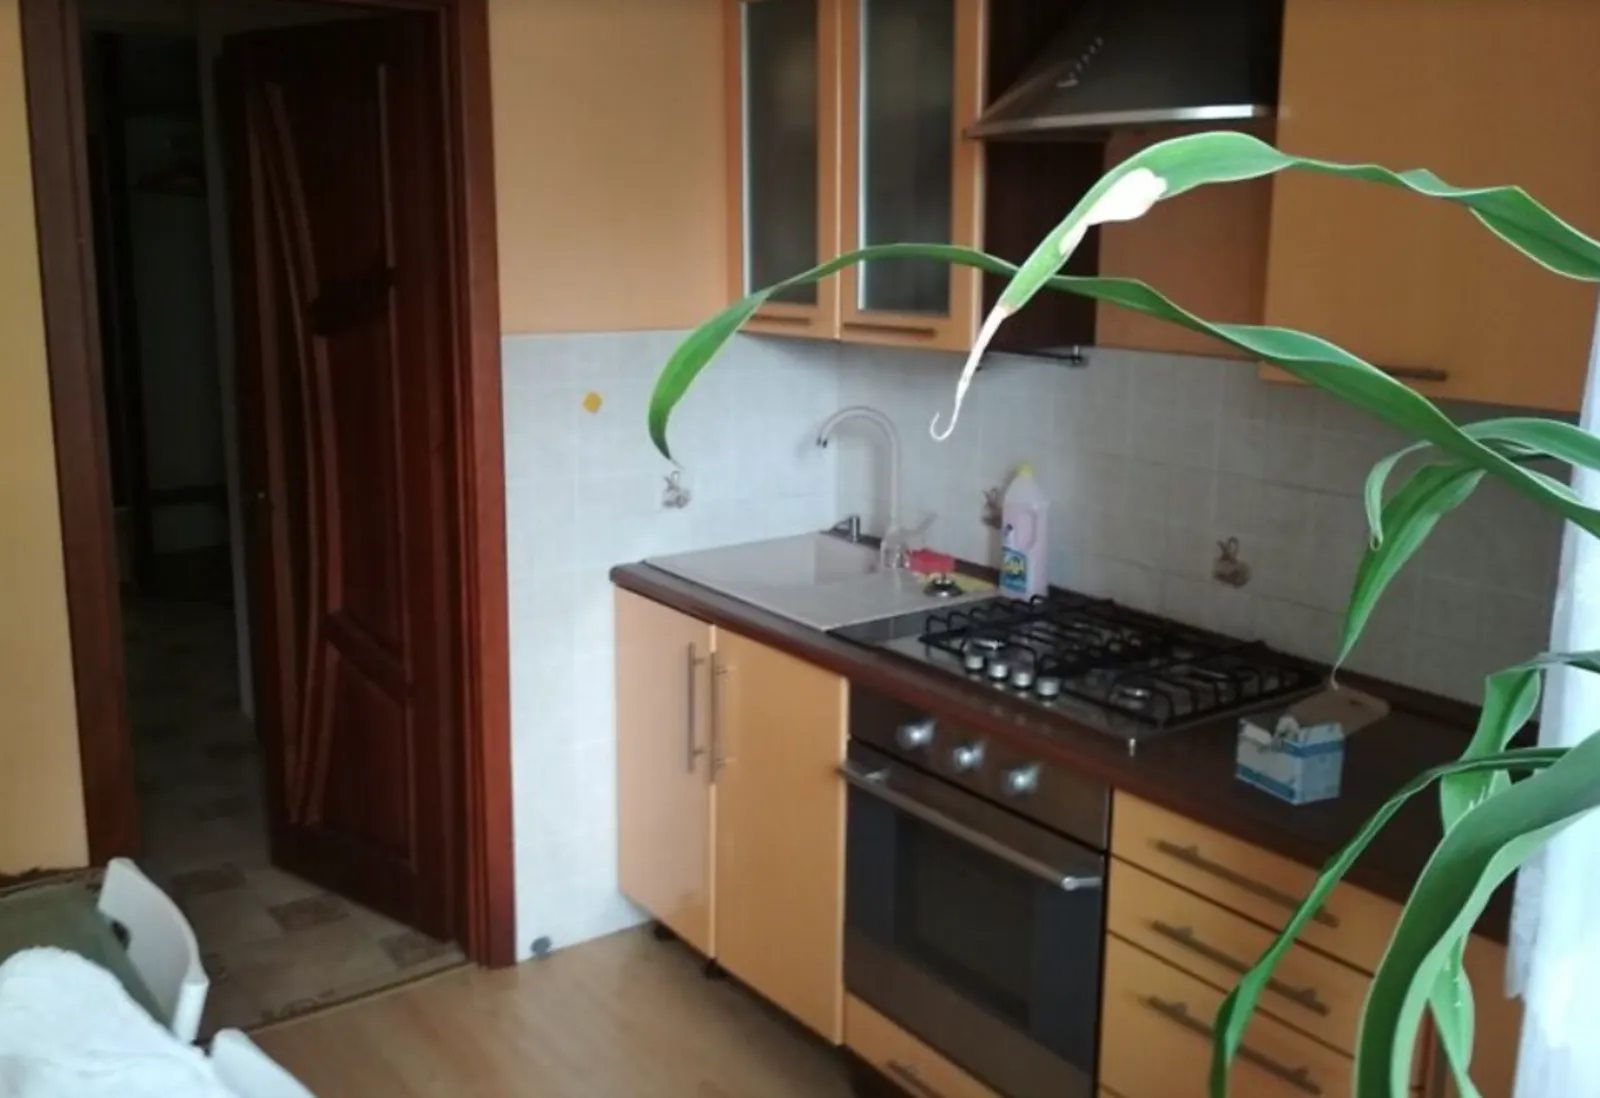 Apartment for rent. 3 rooms, 64 m², 2nd floor/5 floors. Vostochnyy, Ternopil. 